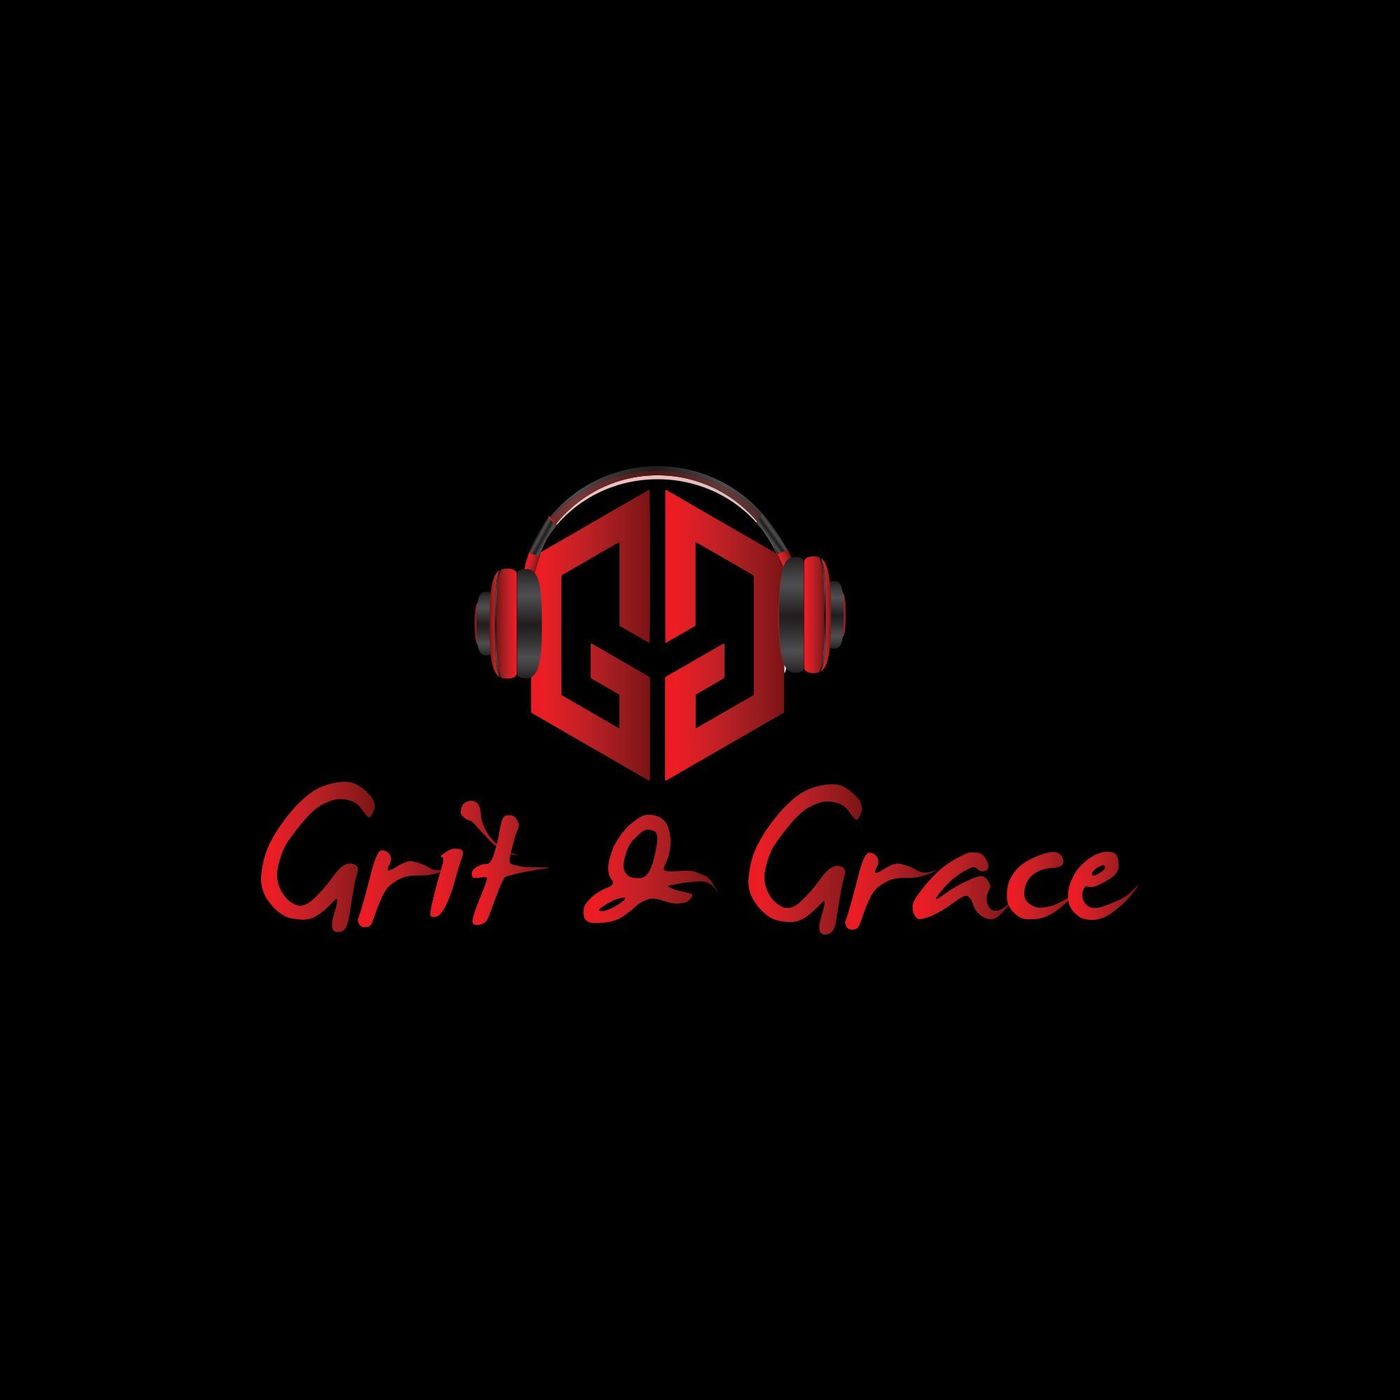 Grit and Grace: Business with Purpose Image